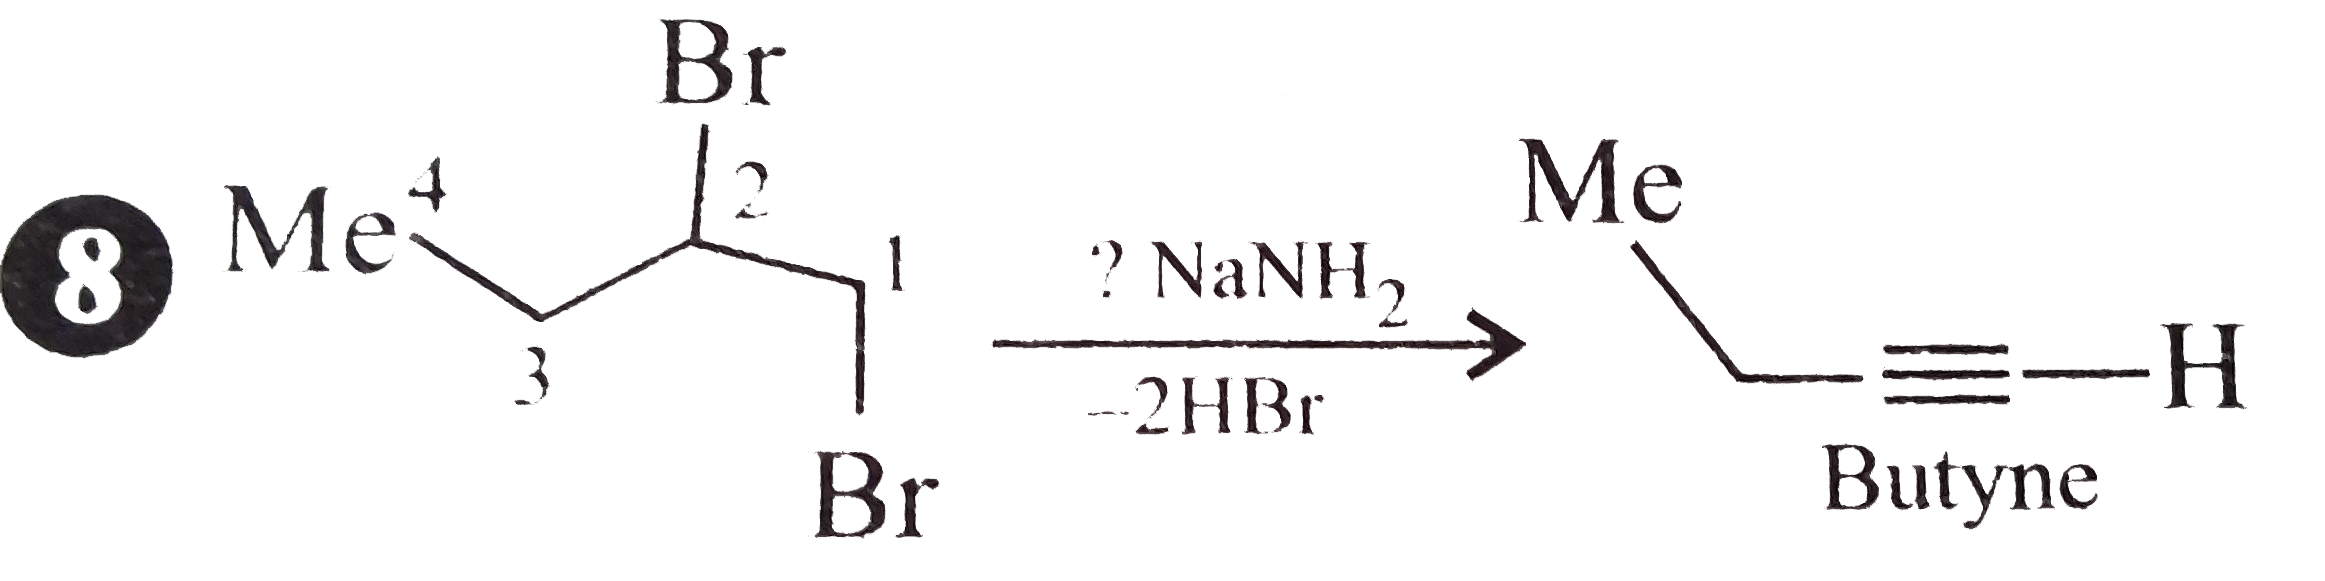 Vicinal dihalides undergo double dehydrohalogenation to give terminal alkyne. How many moles of NaNH2 are used in the overall reaction?